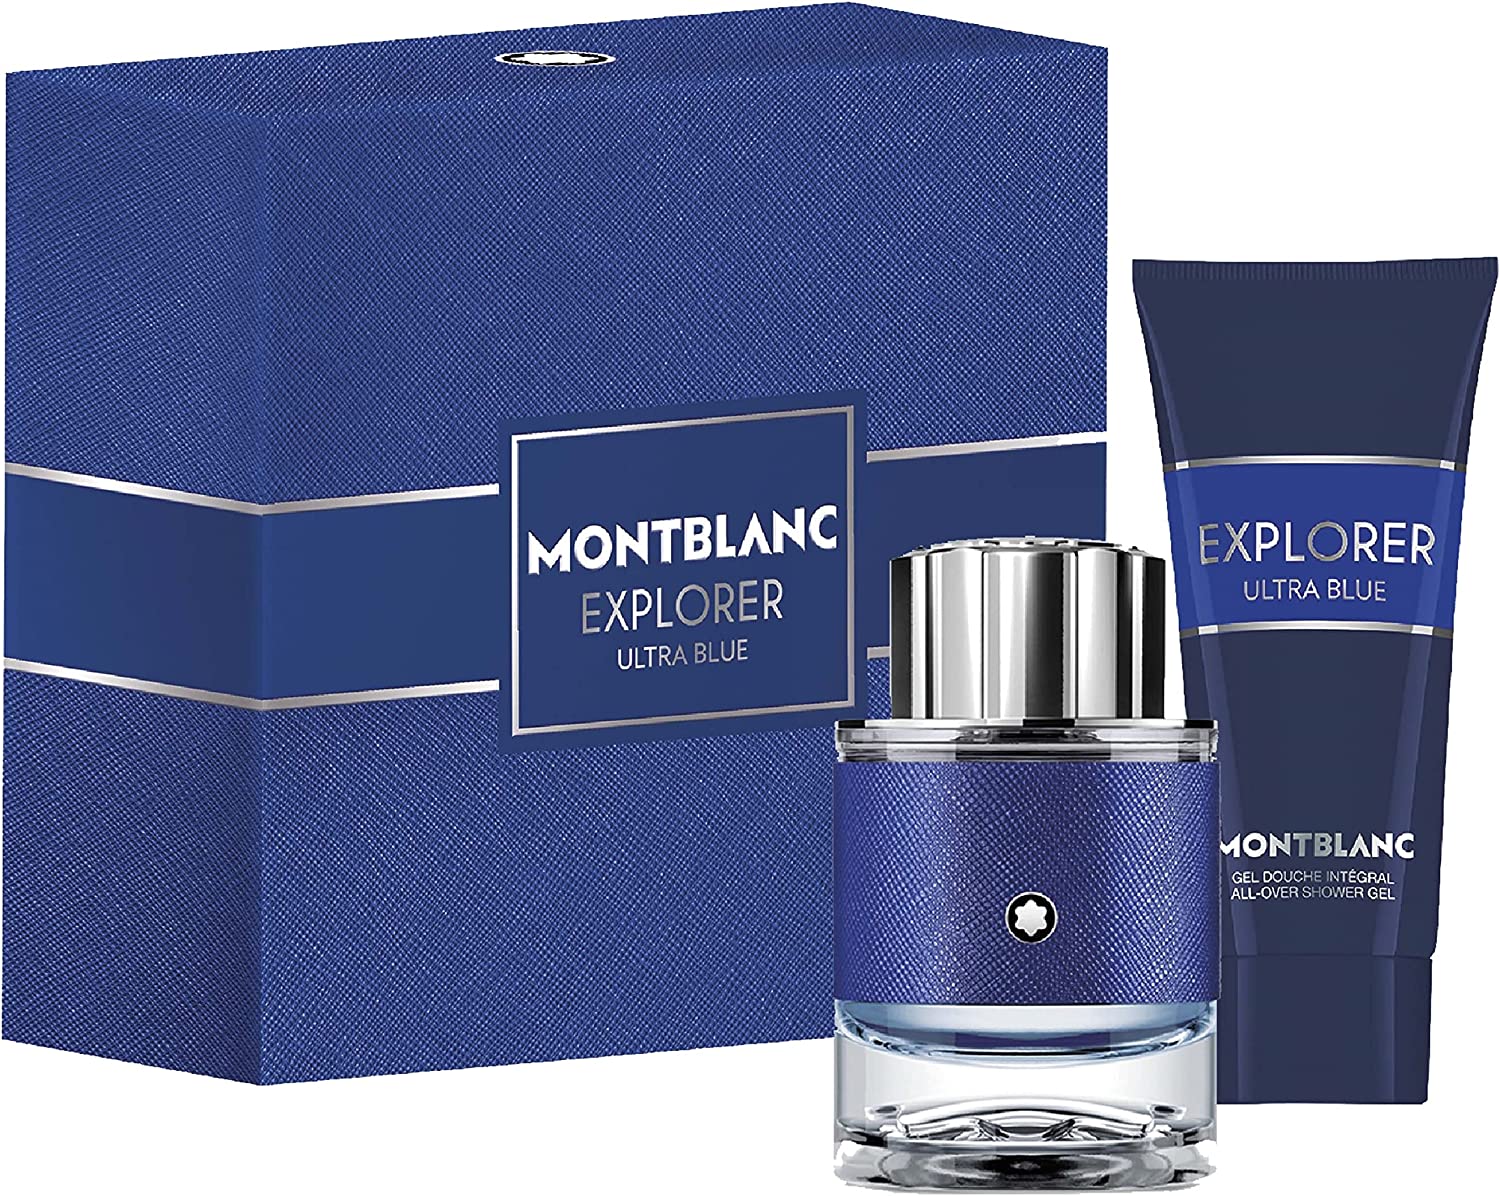 Mont Blanc Explorer Ultra Blue for Men EDP 3 Piece Grooming Kit Sets 7.5ml at Ratans Online Shop - Perfumes Wholesale and Retailer Fragrance